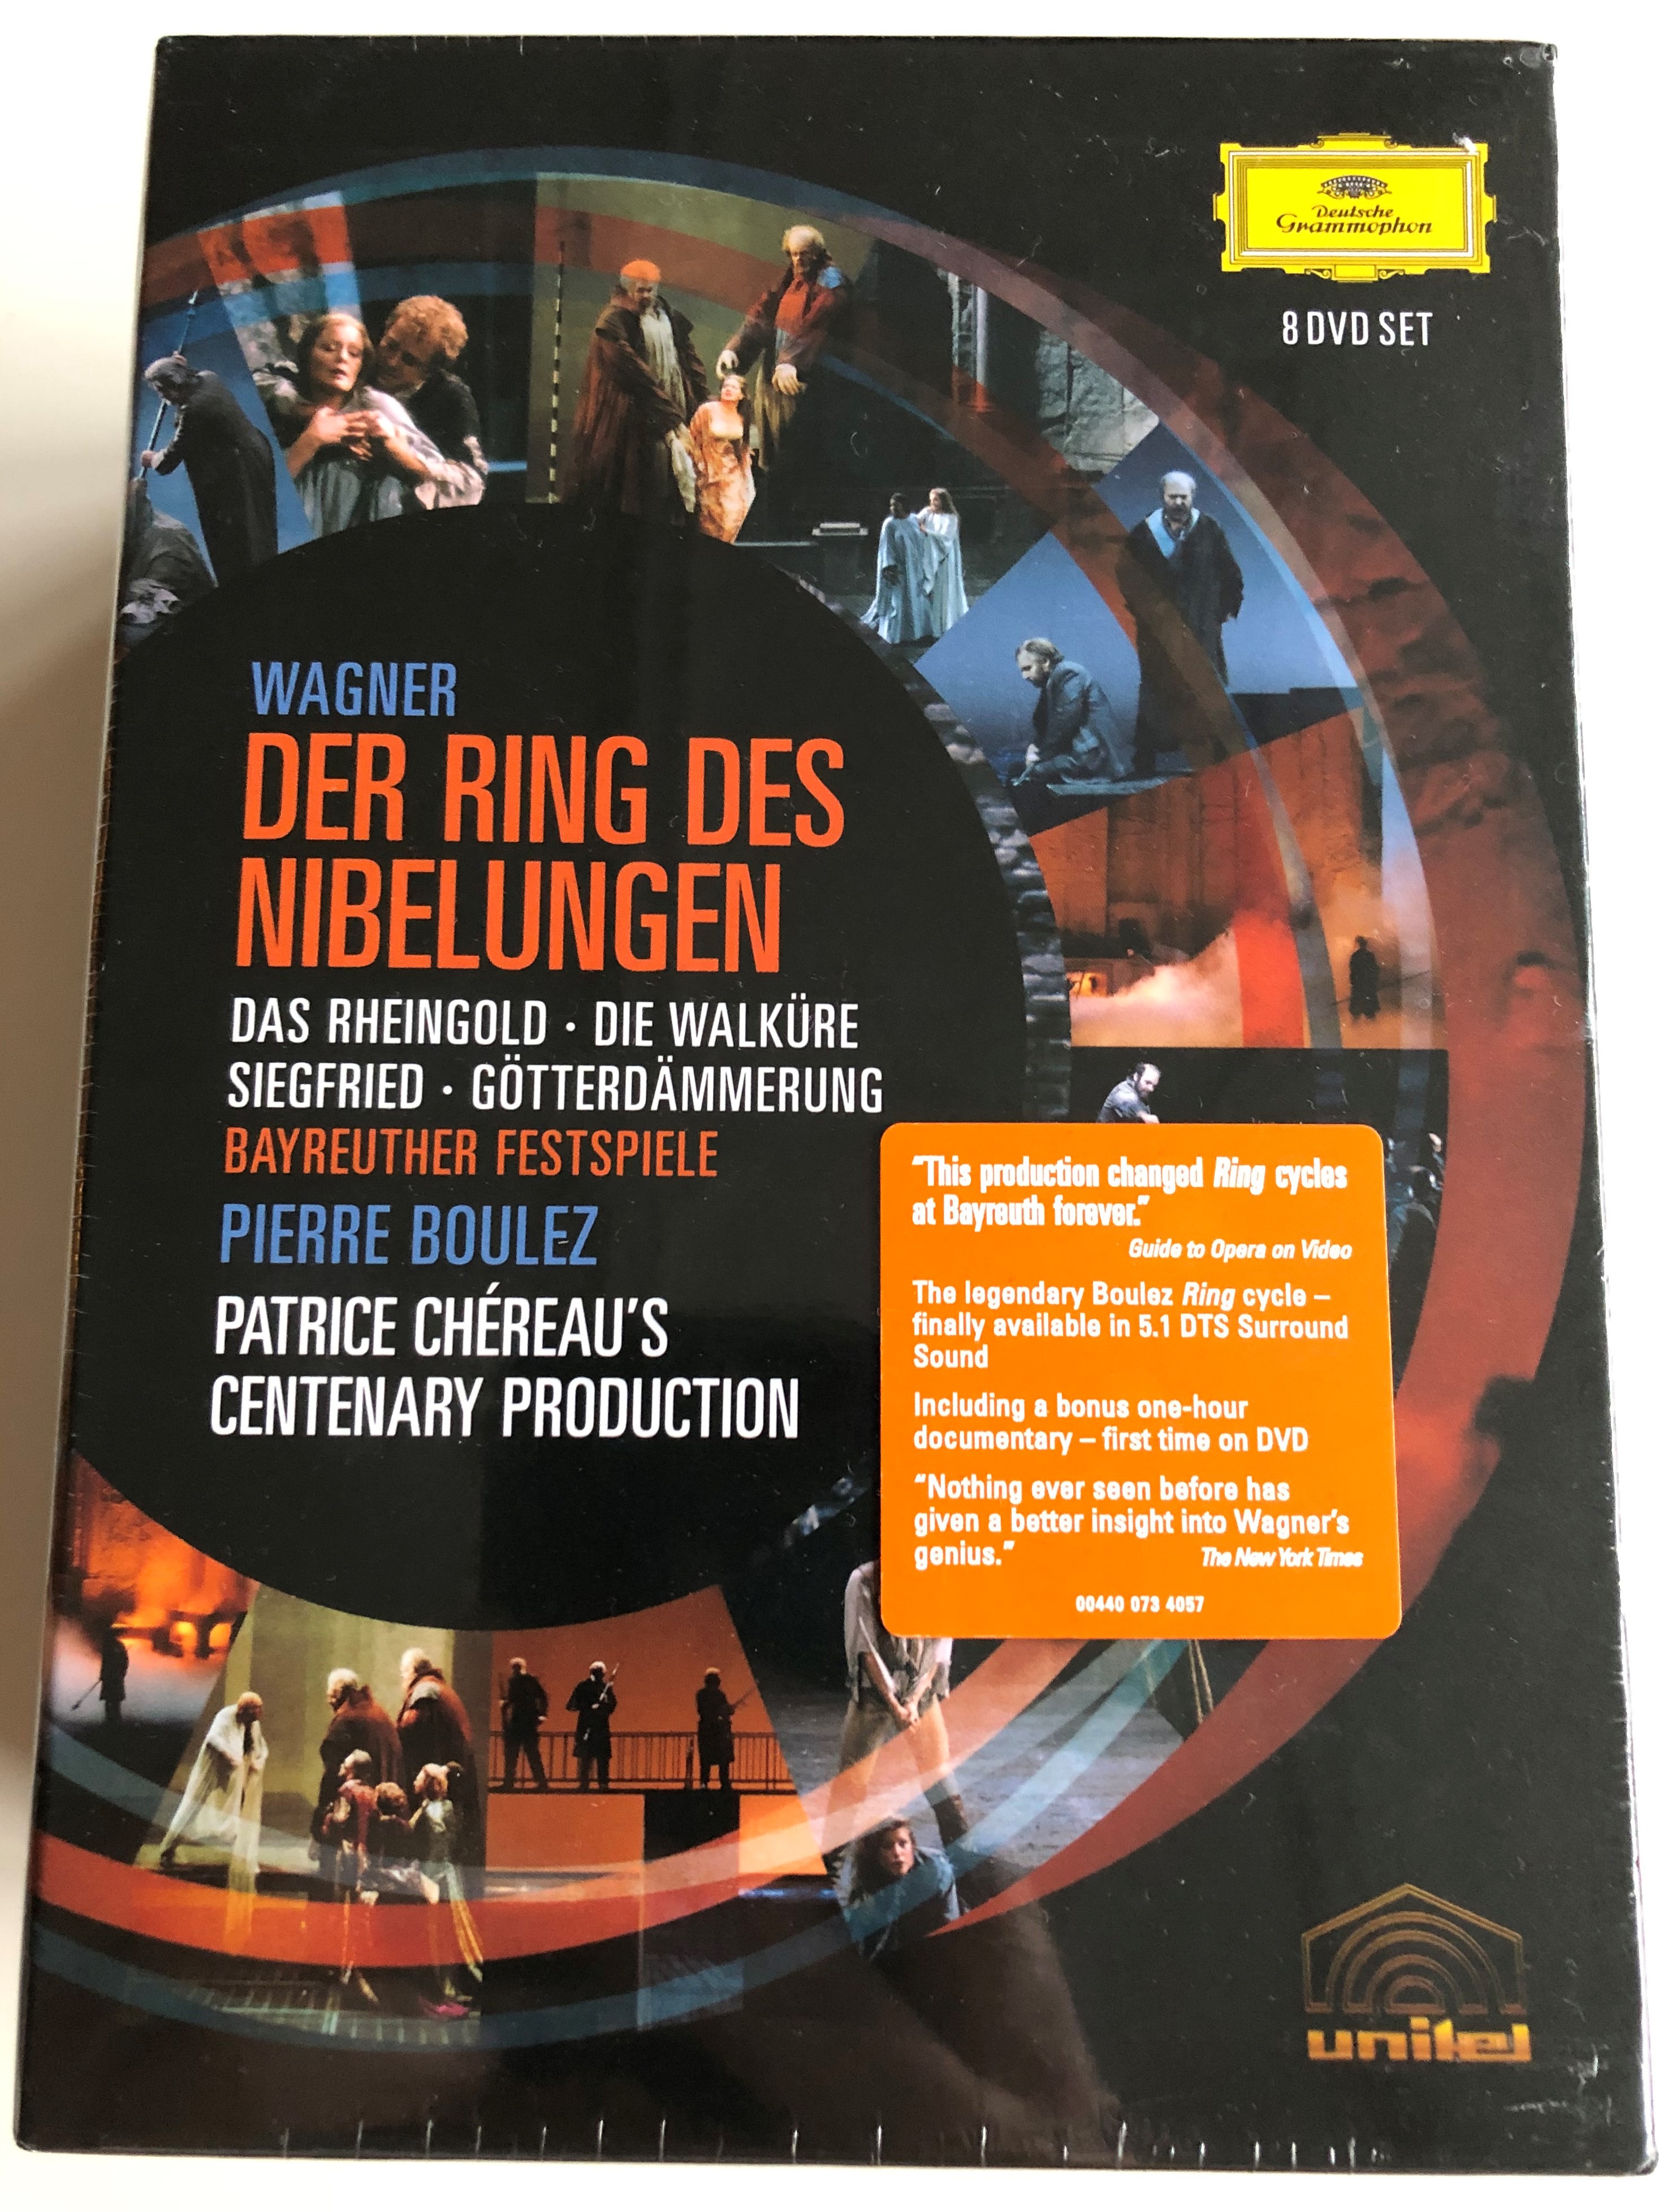 R. Wagner - Der Ring des Nibelungen 8 DVD SET Bayreuther Festspiele /  Pierre Boulez / Directed by Brian Large / Patrice Chéreau's Centenary  Production / Bonus - Making of the Ring documentary - bibleinmylanguage